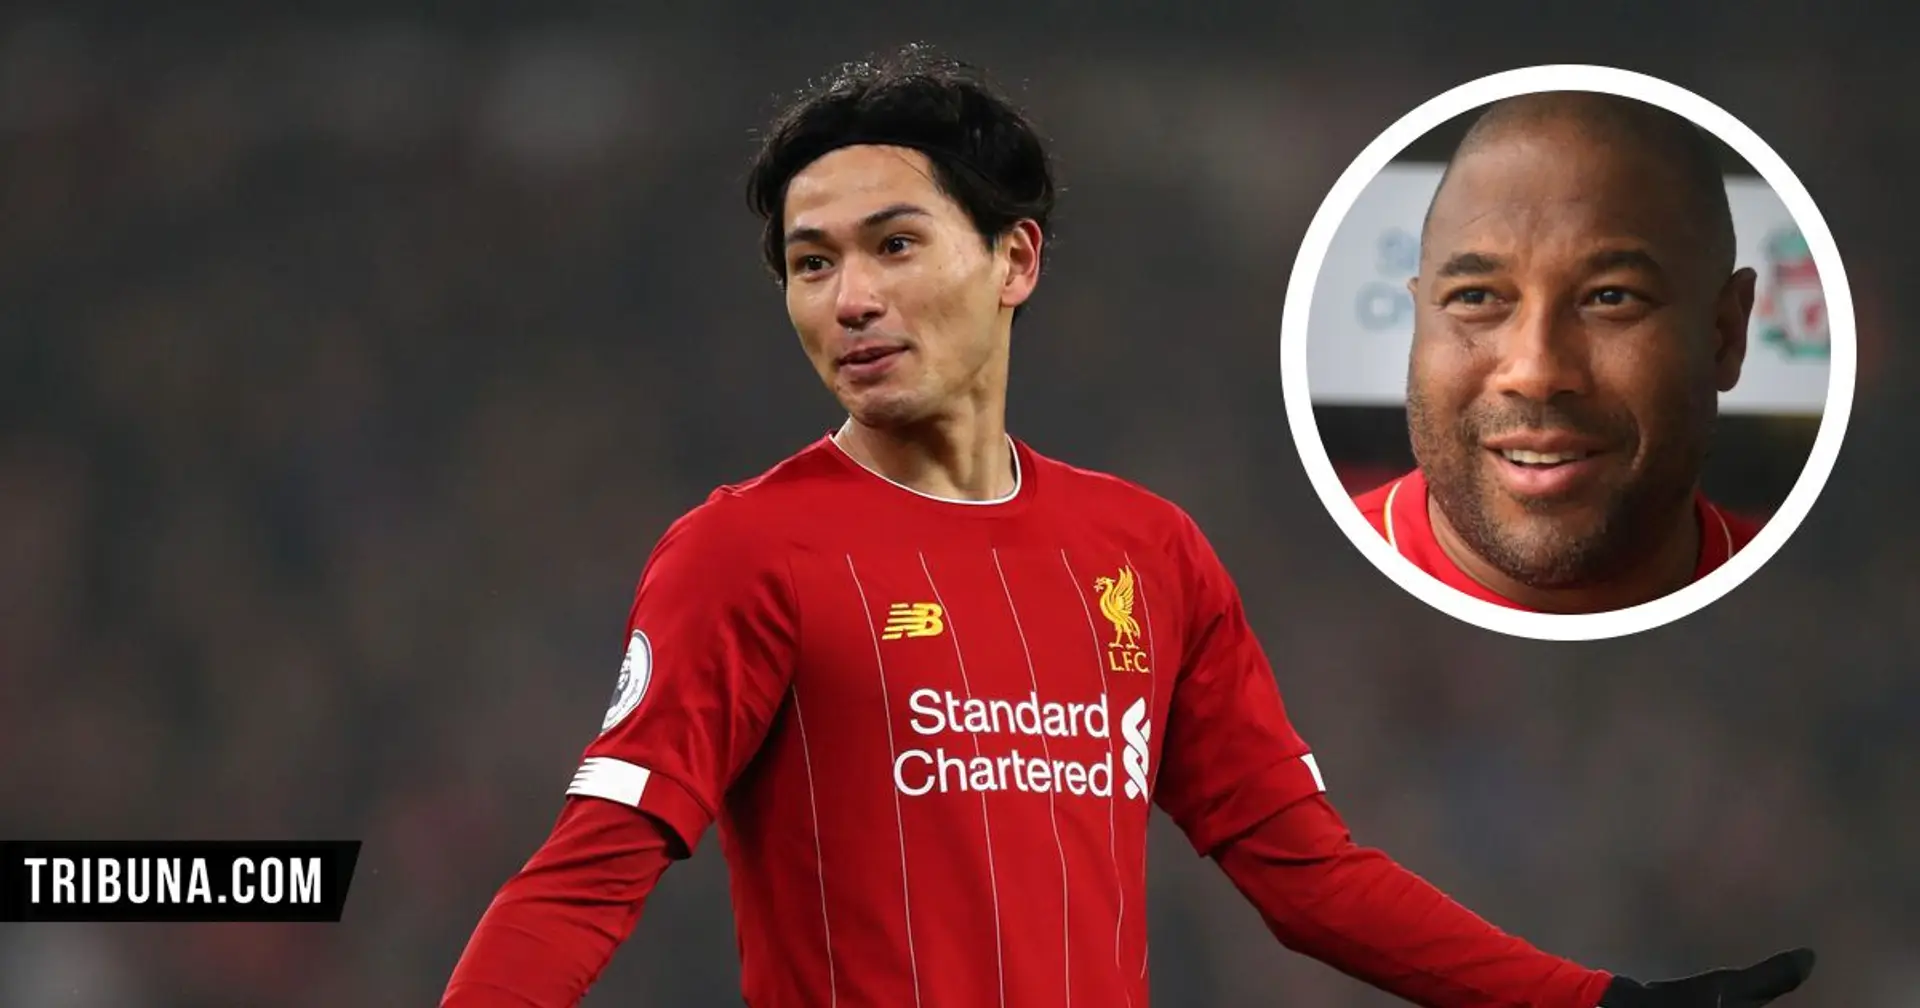 'He is an attacking midfielder': John Barnes explains why Takumi Minamino should not be played out wide 